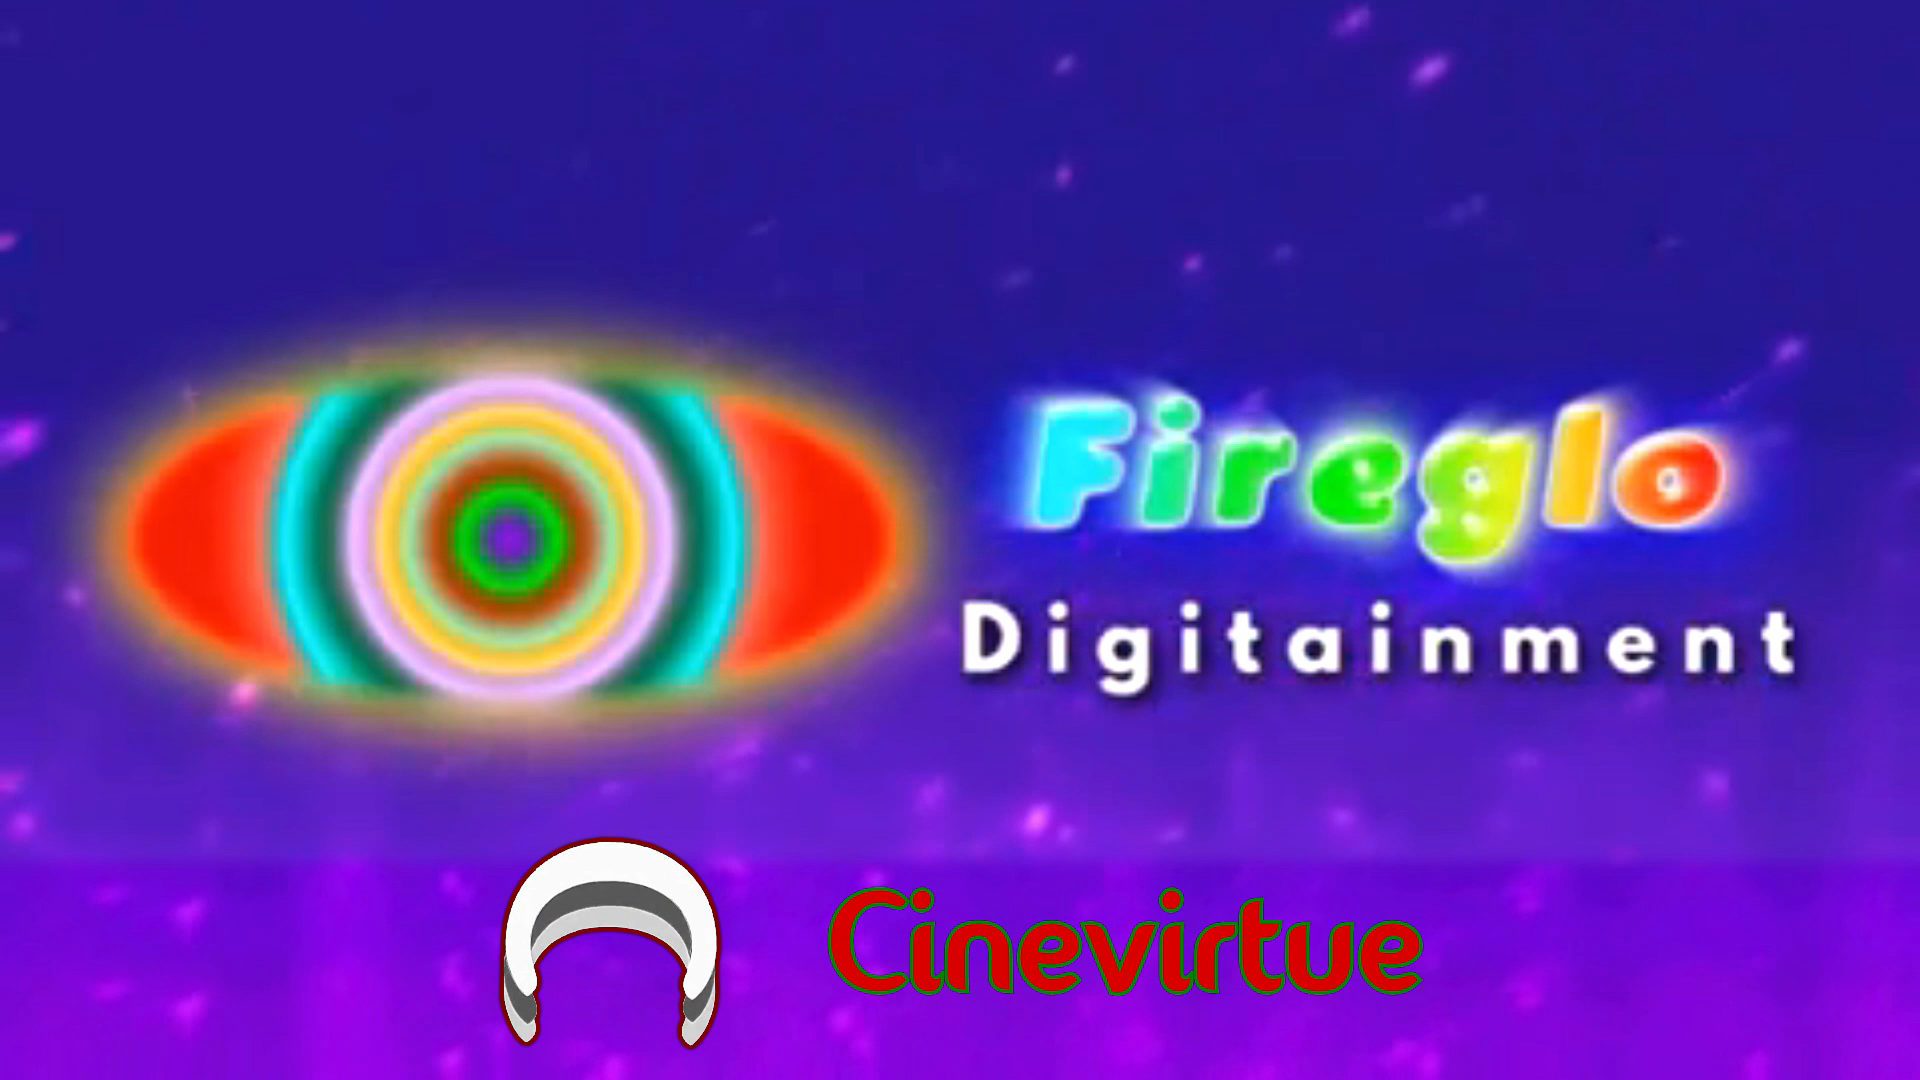 The fonts used in the Fireglo Digitainment logo.